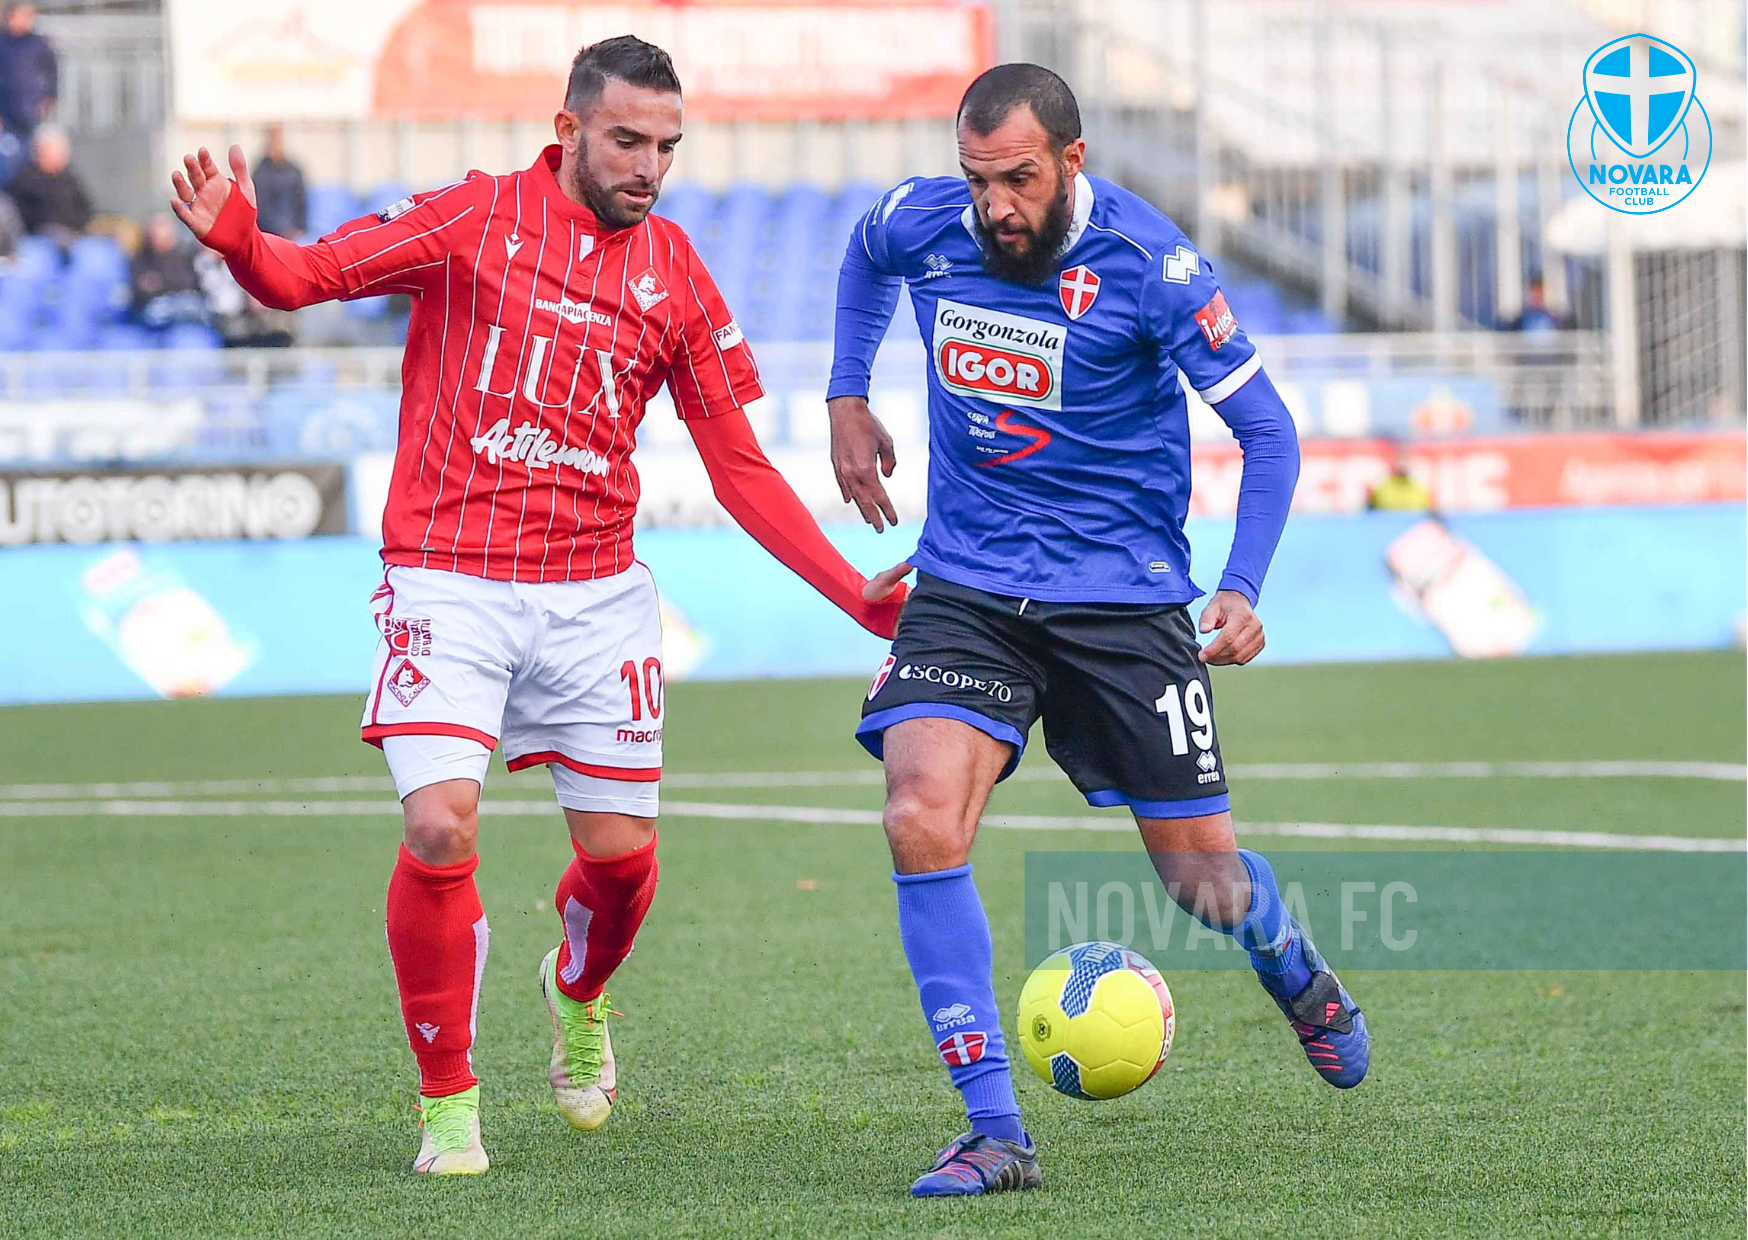 Read more about the article Novara-Piacenza 1-1 | Gallery